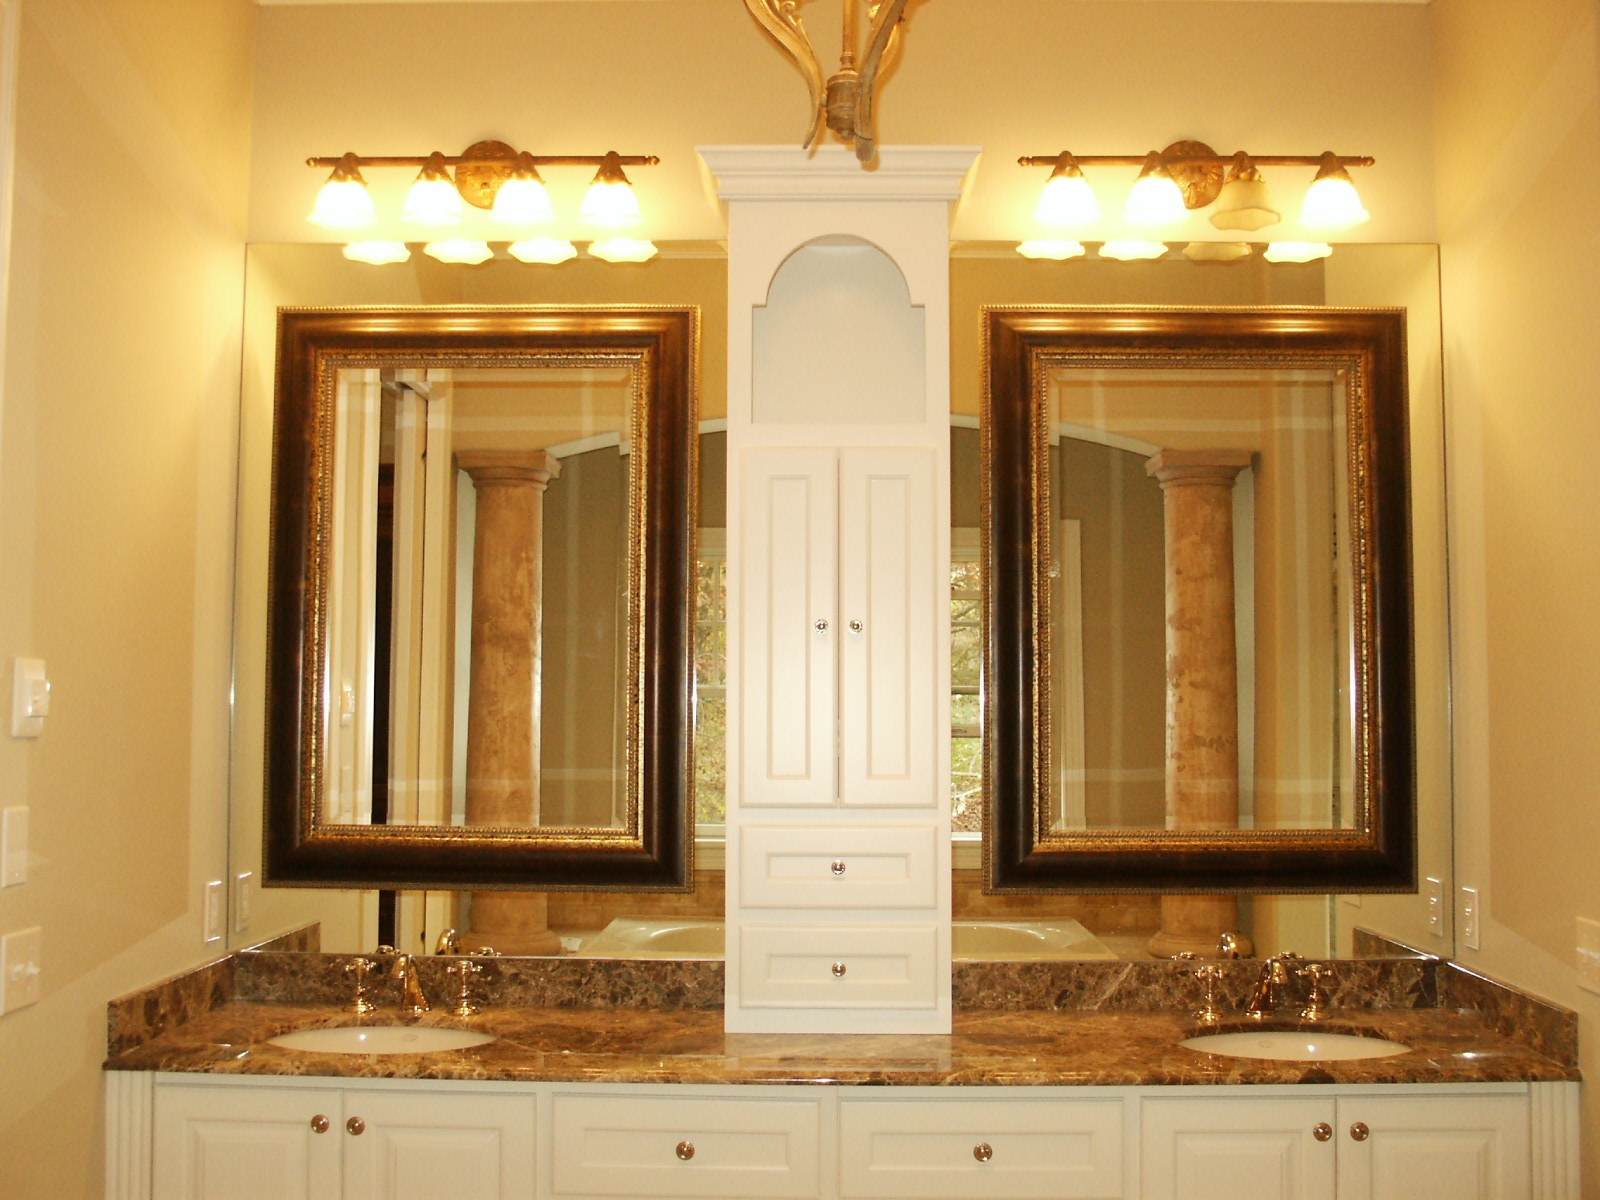 Bathroom Wall Mirrors Framed: Reflection Of Style And Elegance